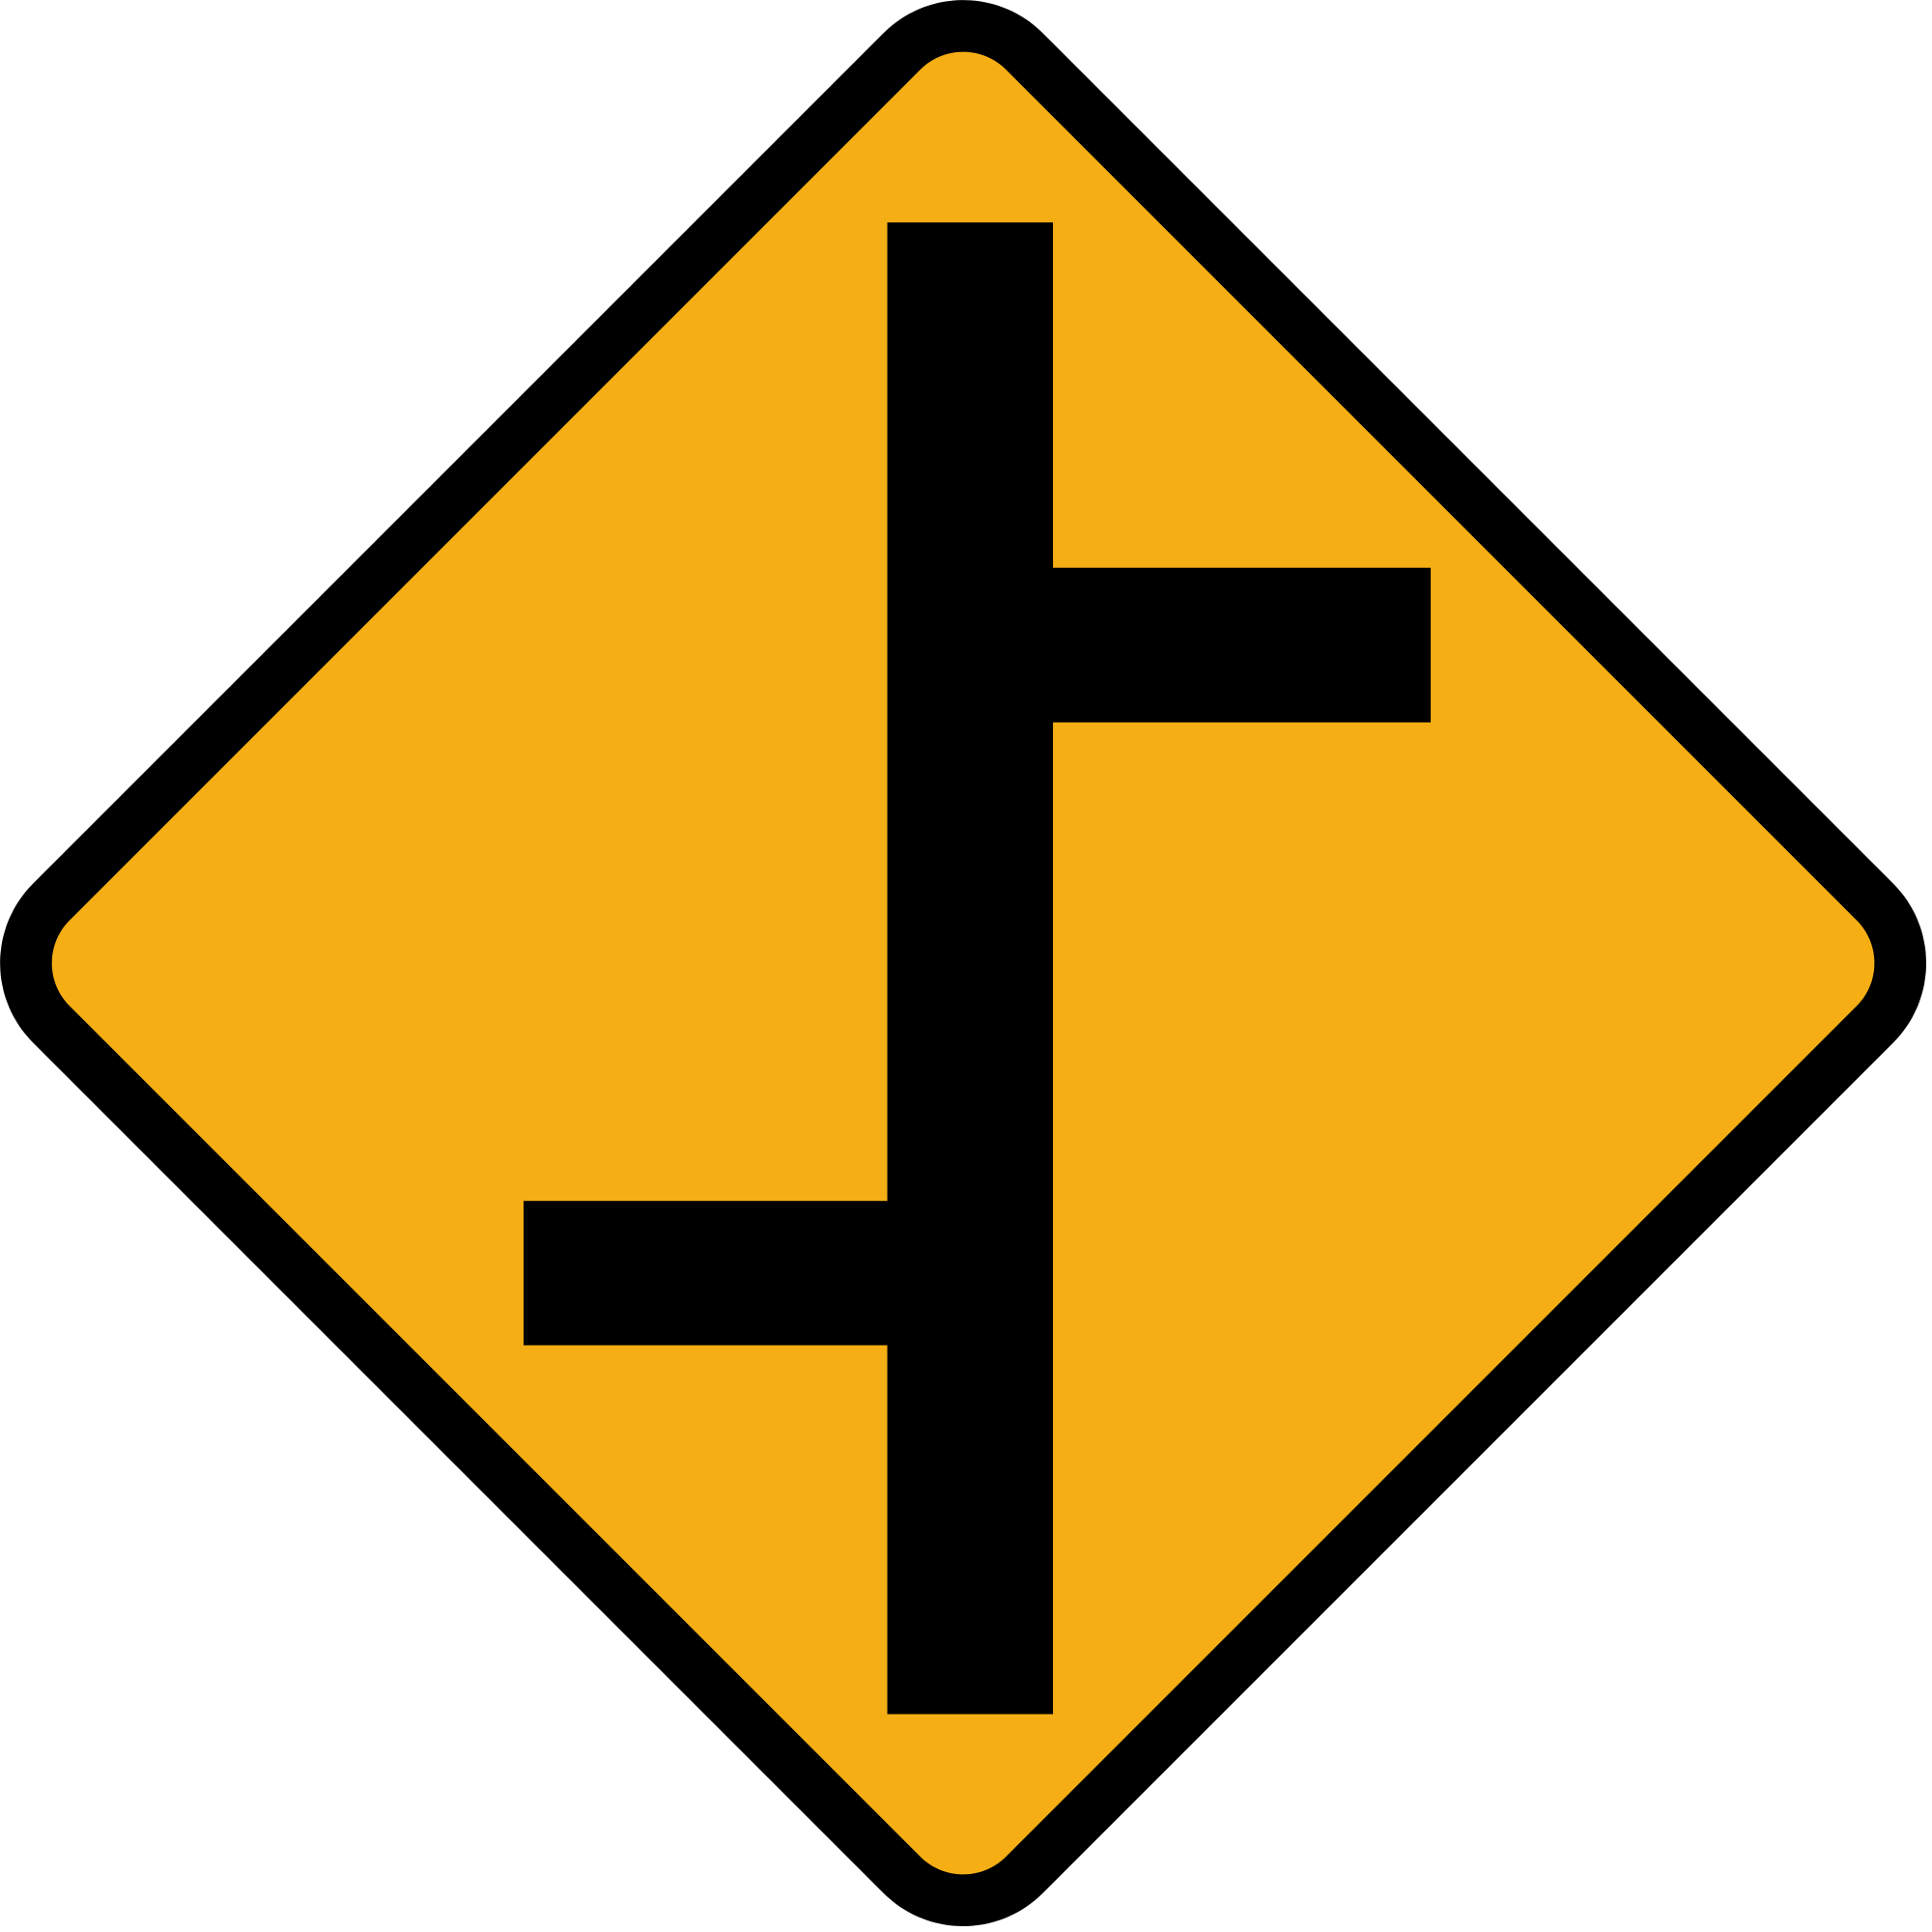 File:Diamond road sign staggered junction equal roads.svg ...